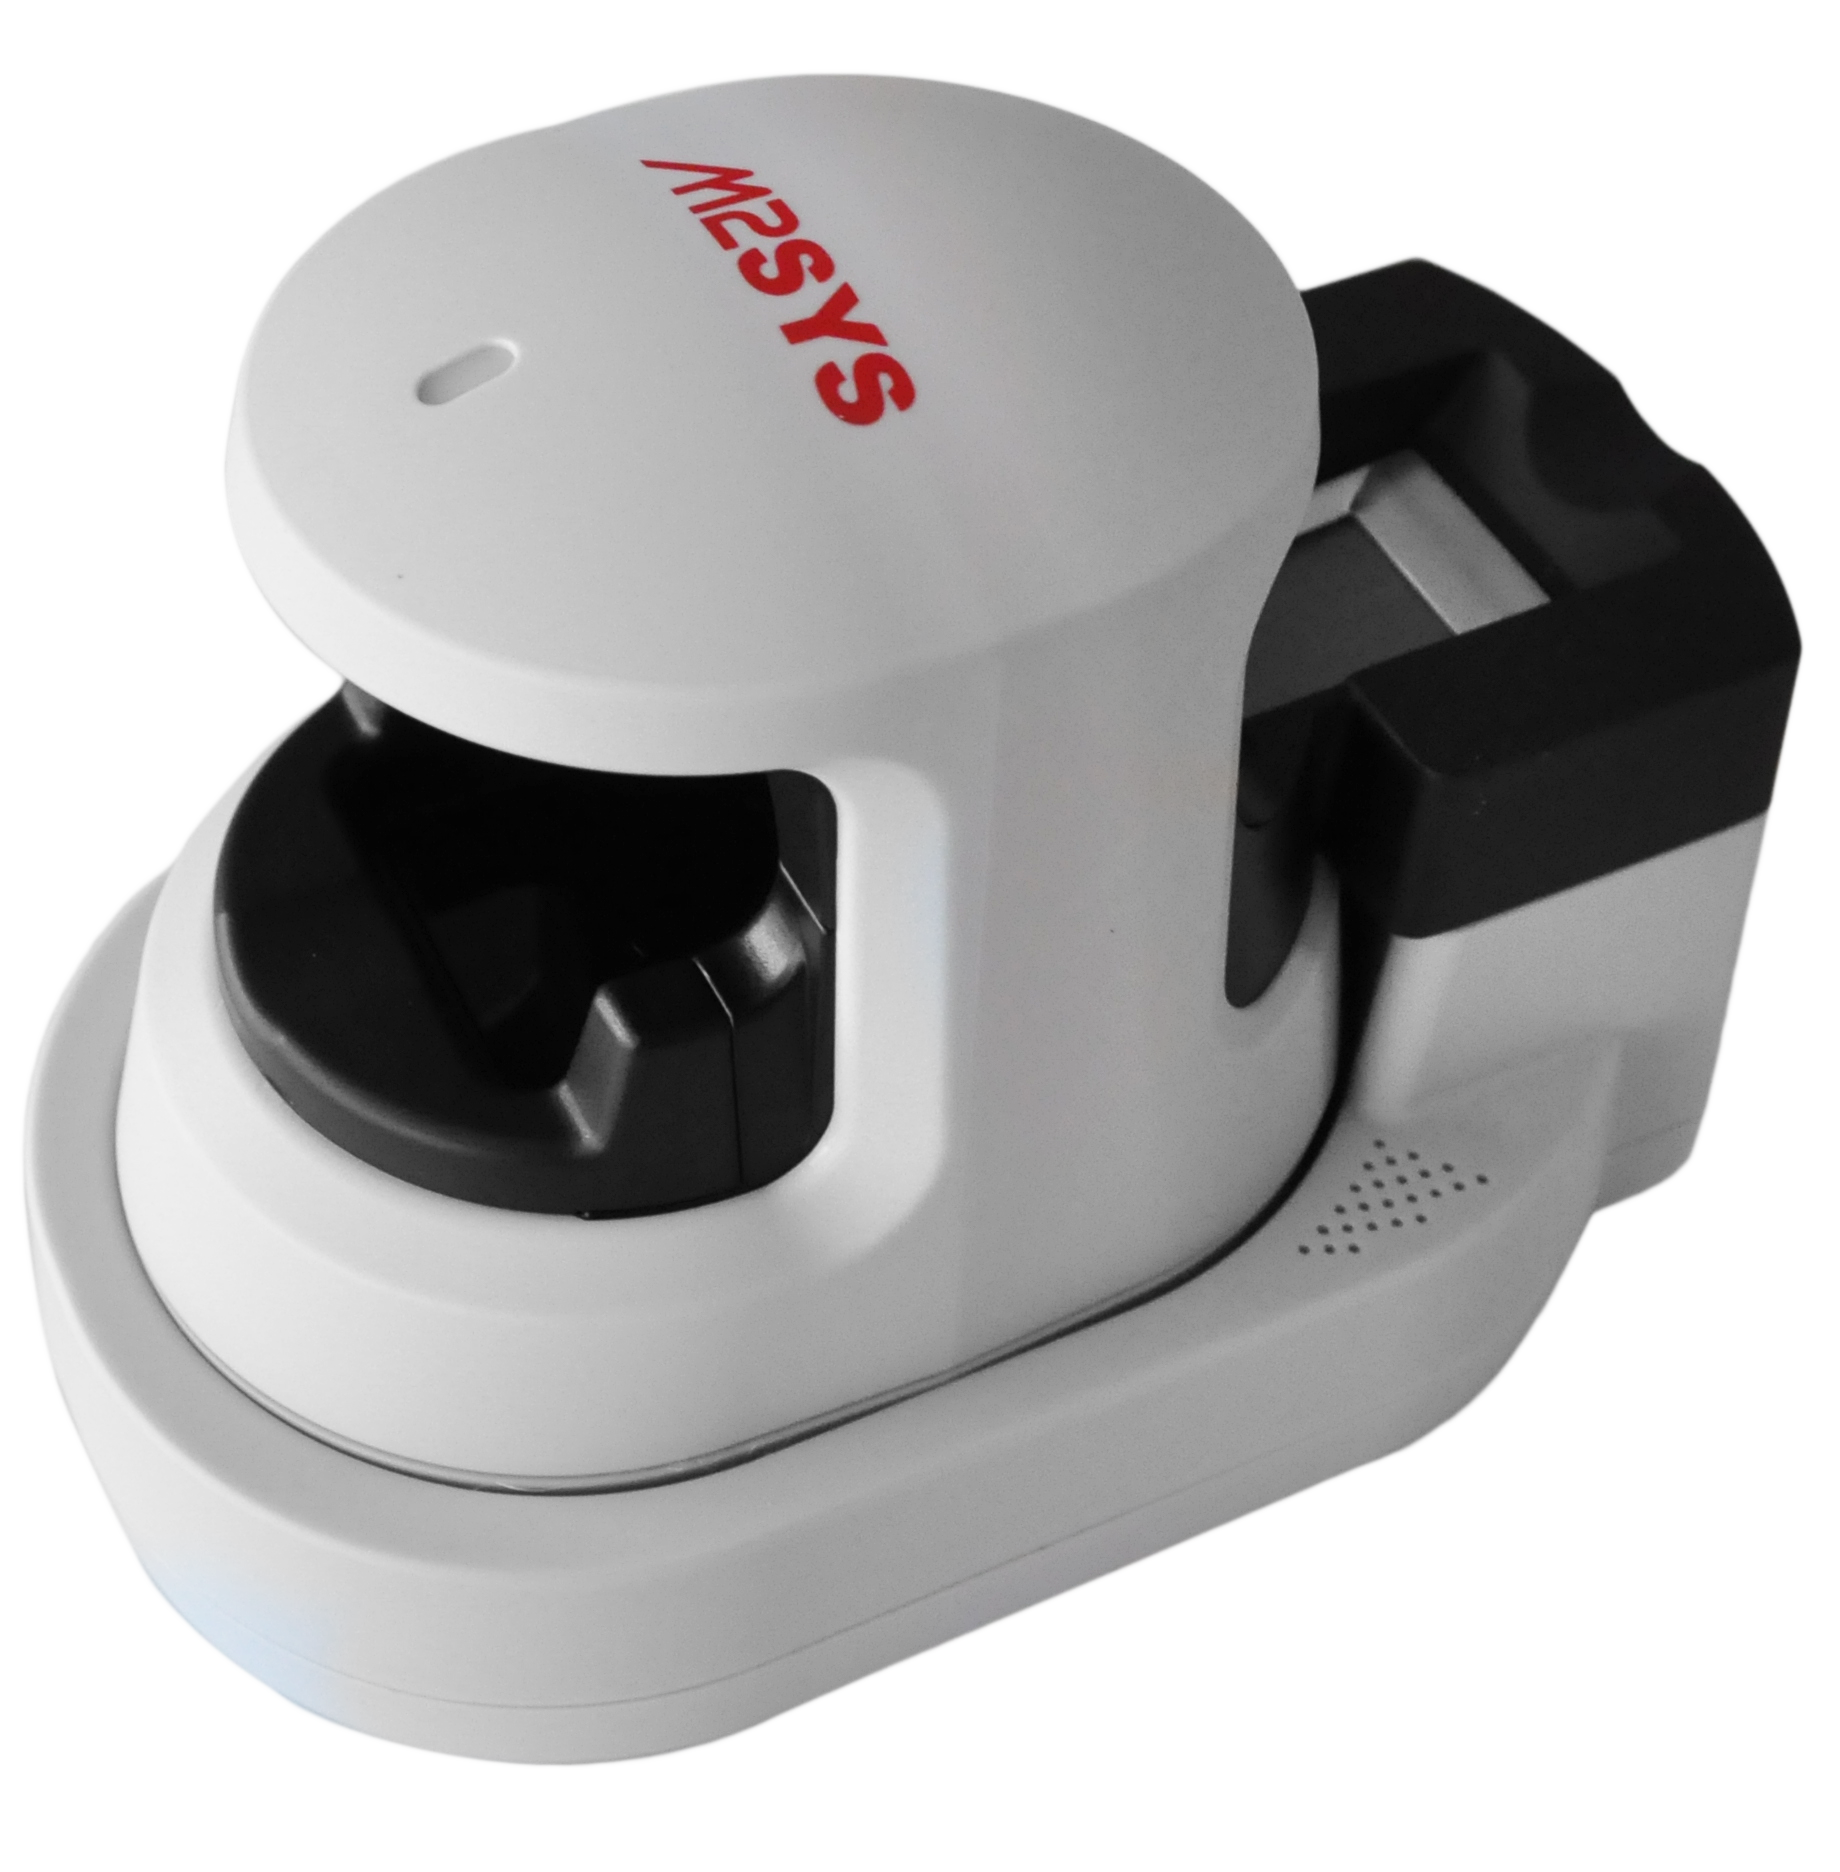 M2-FuseID is a multimosal biometric finger reader that simultaneously captures a fingerprint and finger vein pattern.